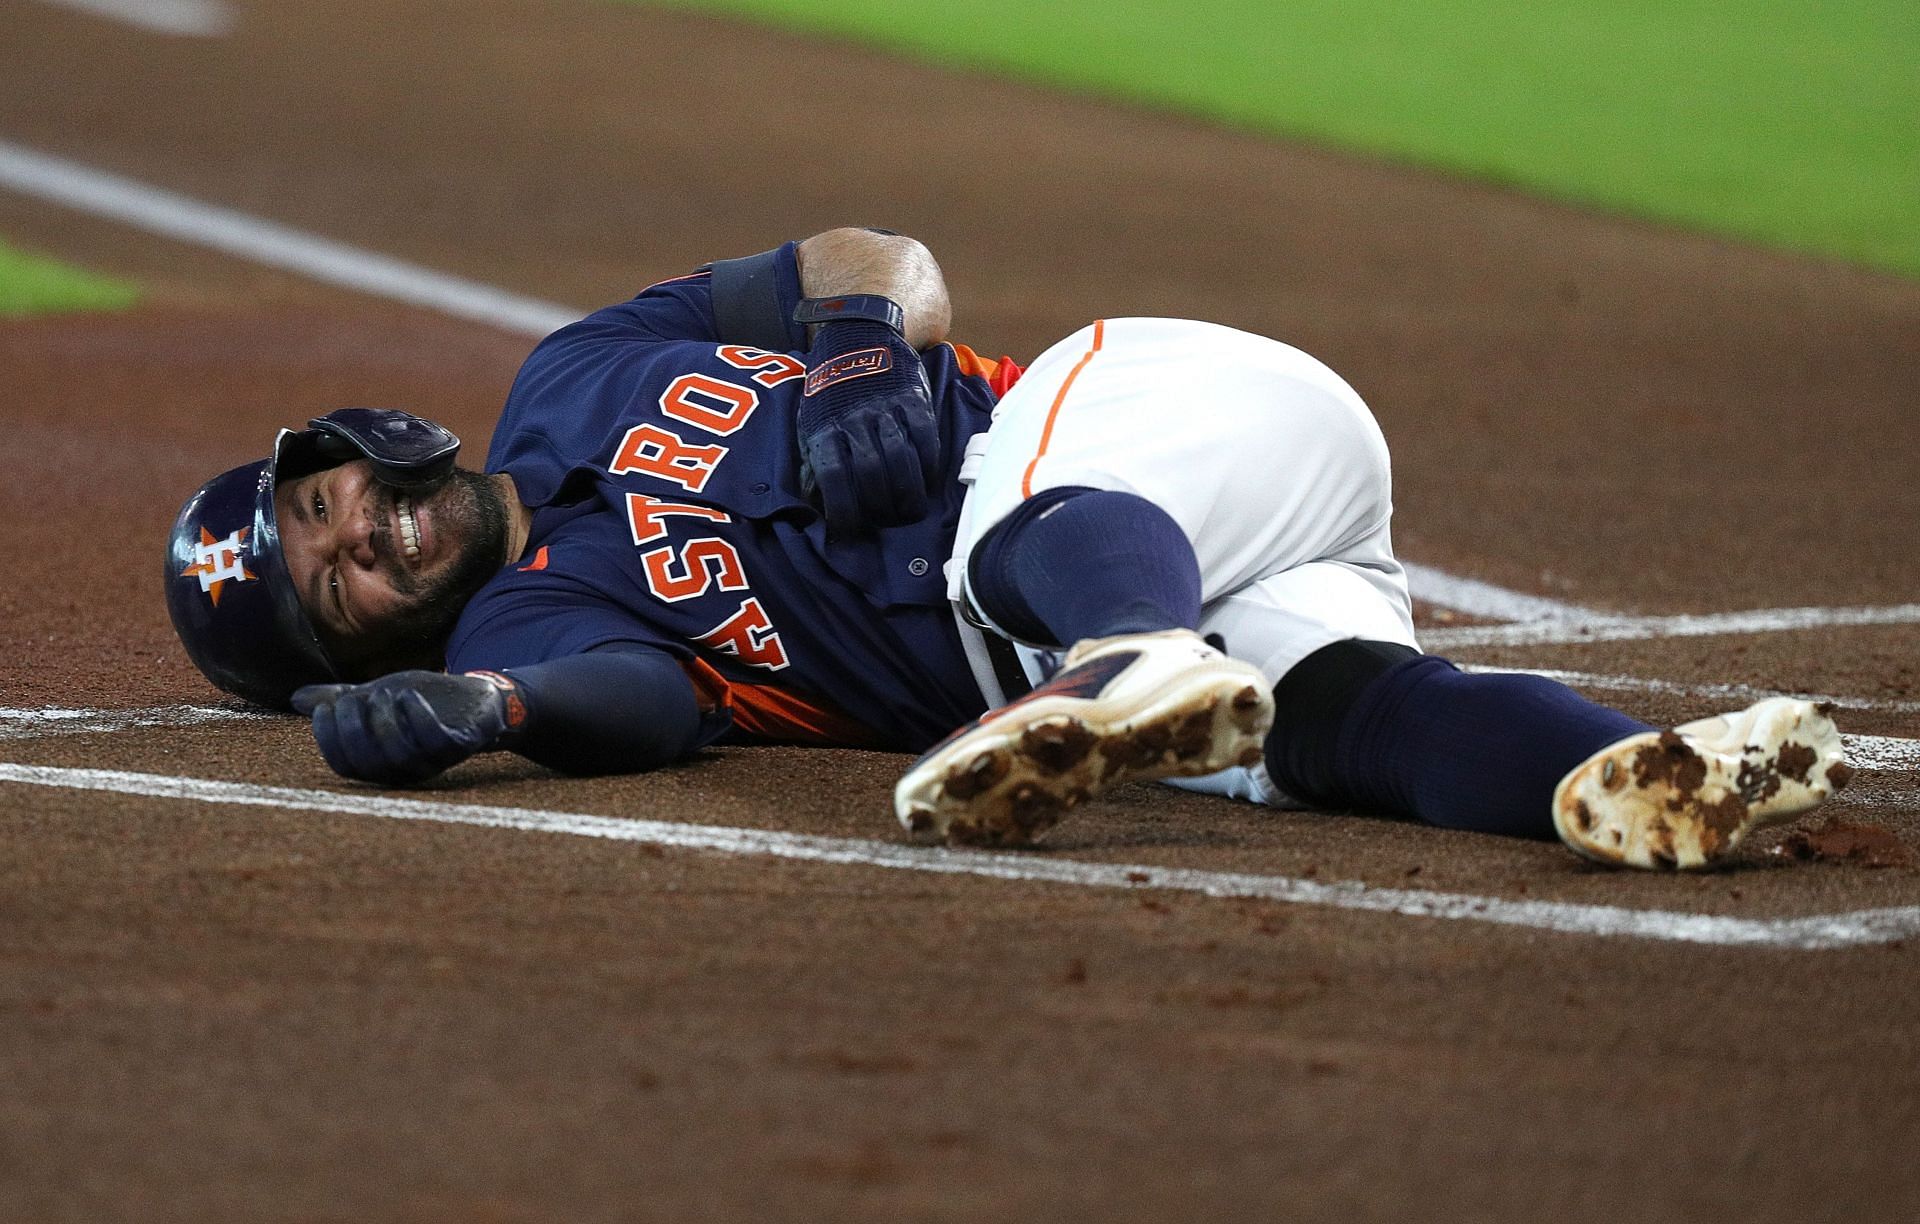 Novelty no more: Astros' Jose Altuve in the conversation as one of  baseball's best